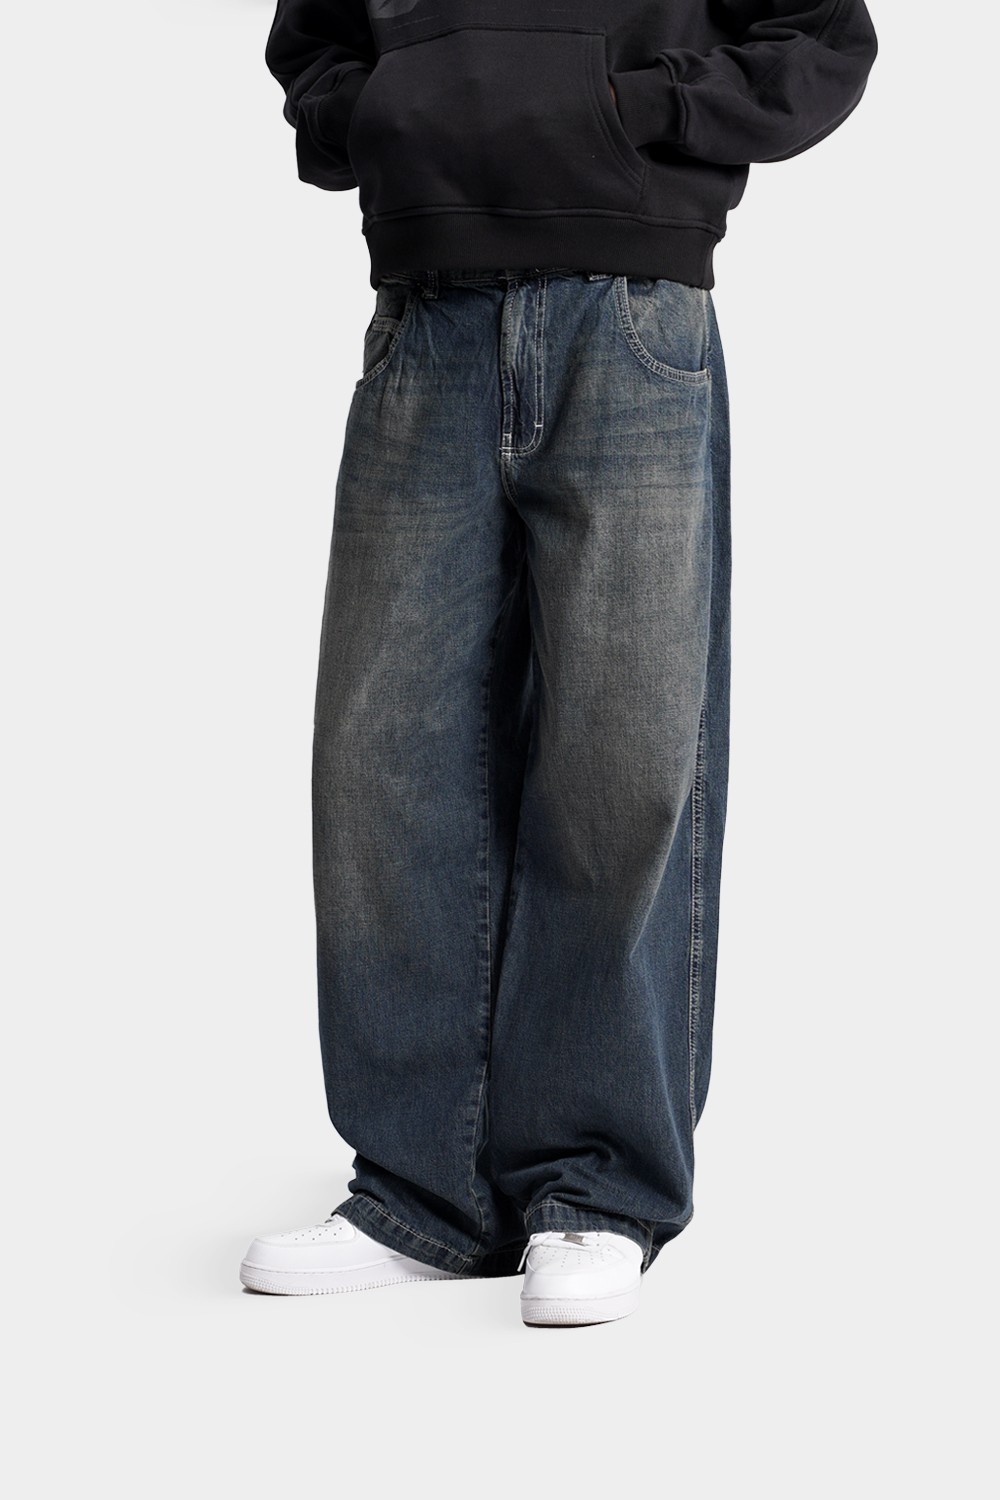 Ultra Baggy Washed Neo Skate Jeans (URBN-B-204)